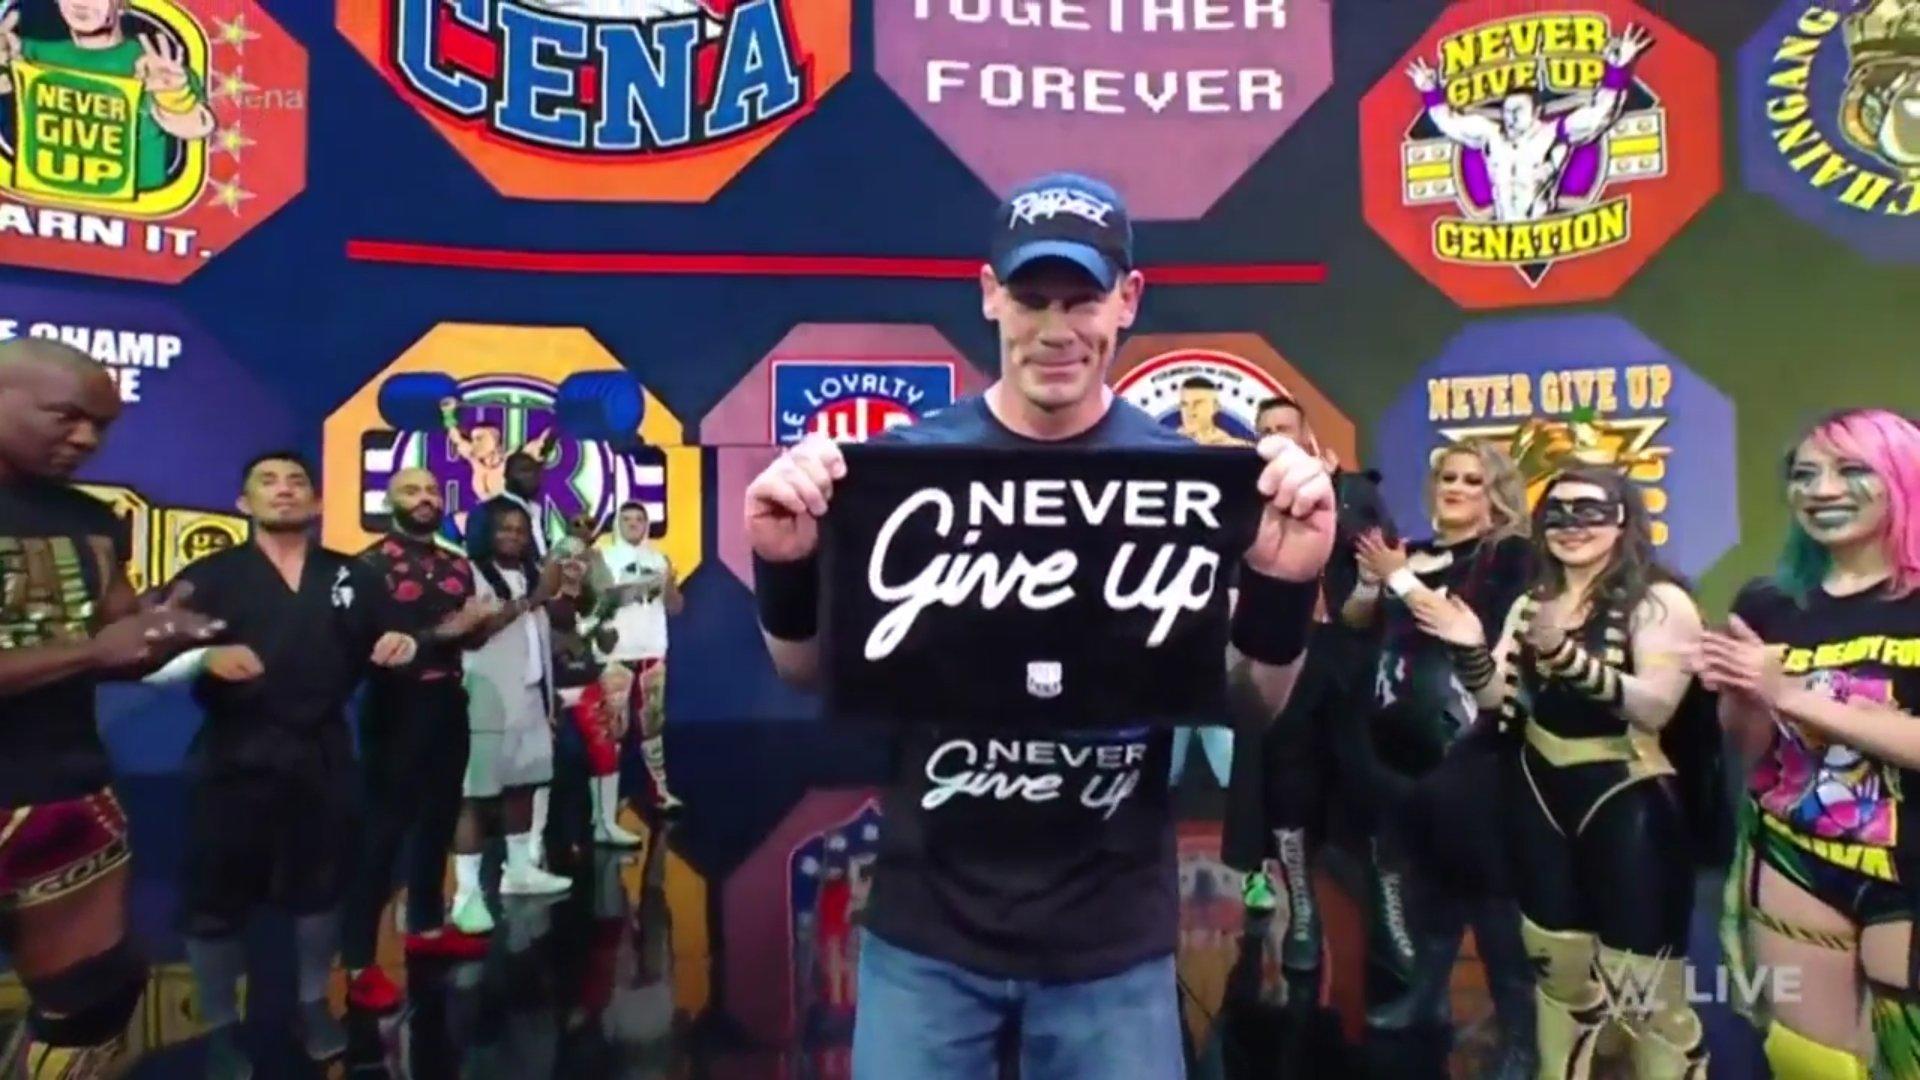 WWE Universe Obsessed With John Cena's Return to Monday Night Raw